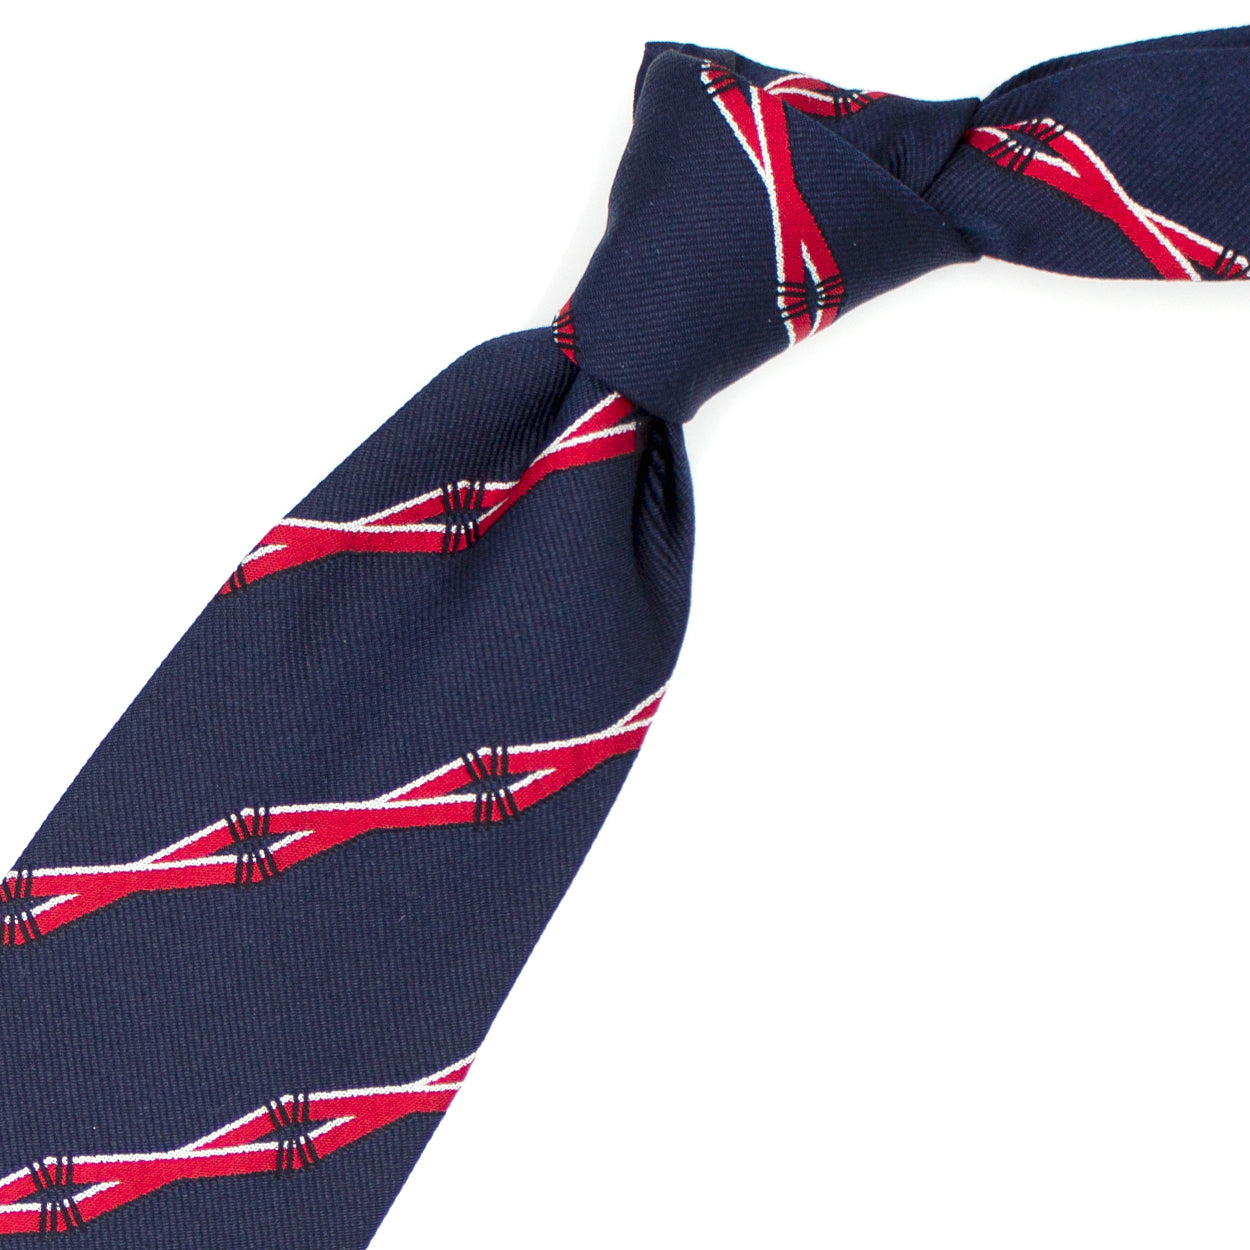 Blue tie with red stripes